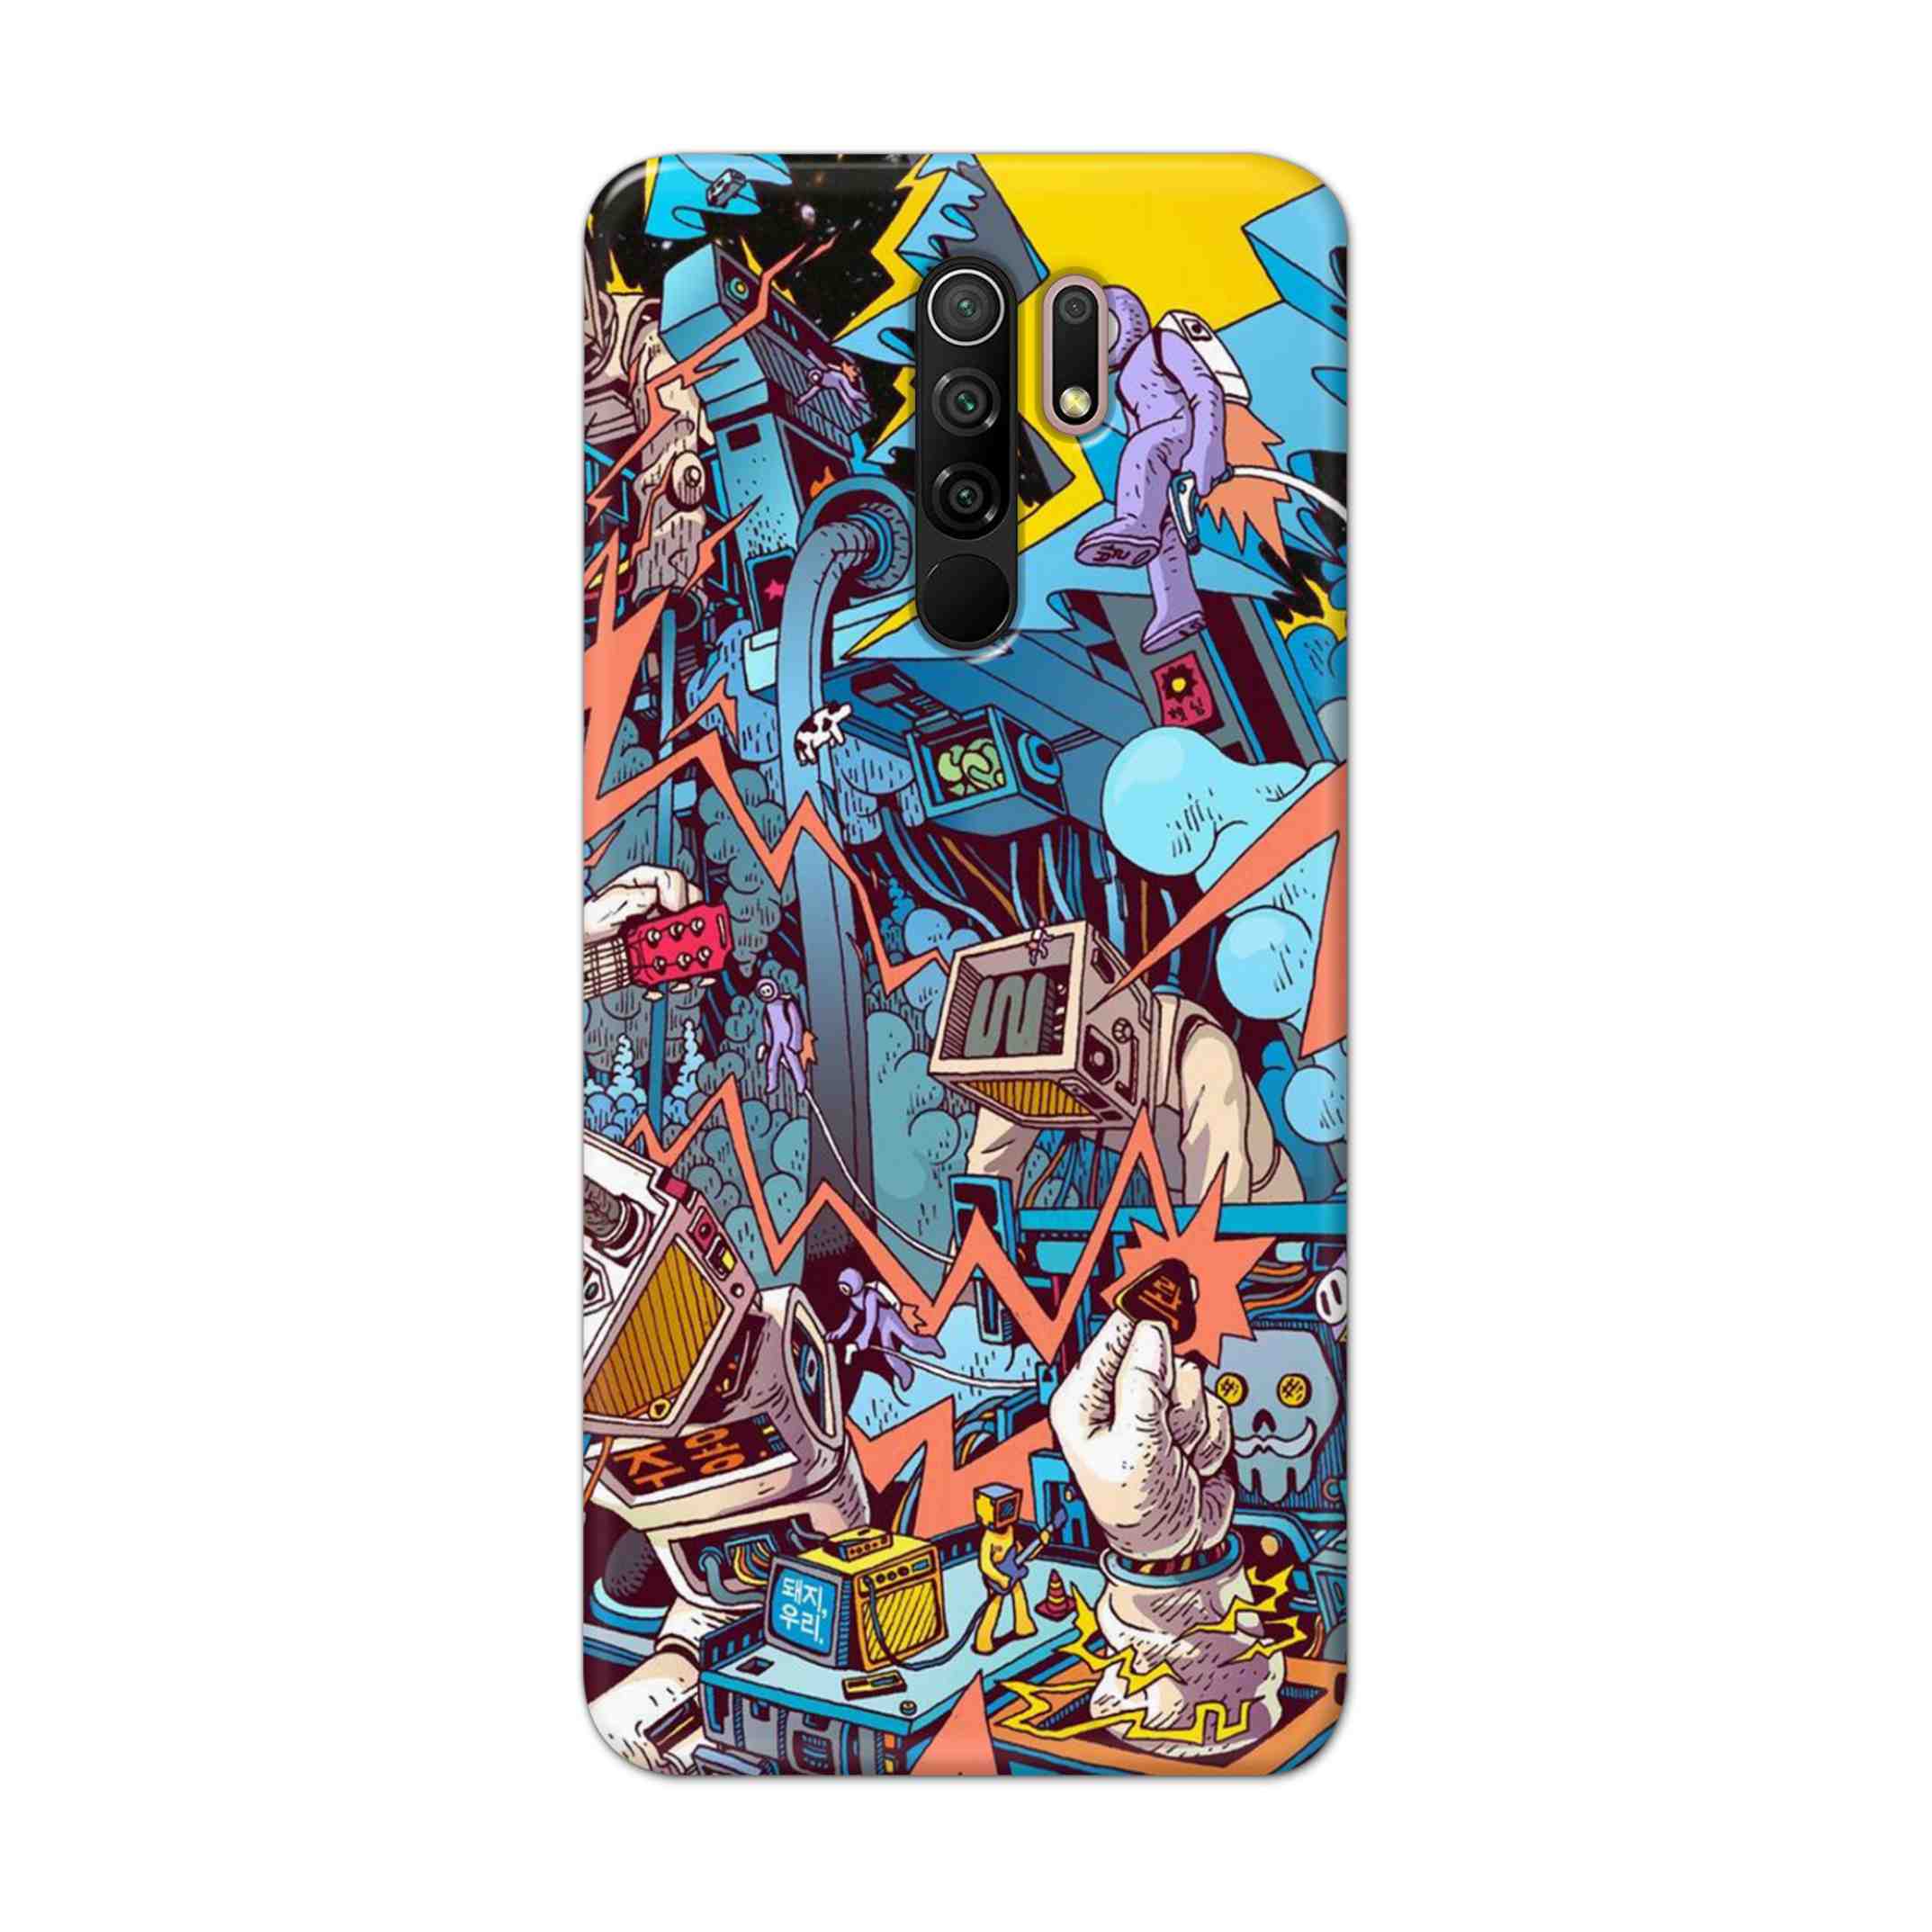 Buy Ofo Panic Hard Back Mobile Phone Case Cover For Xiaomi Redmi 9 Prime Online